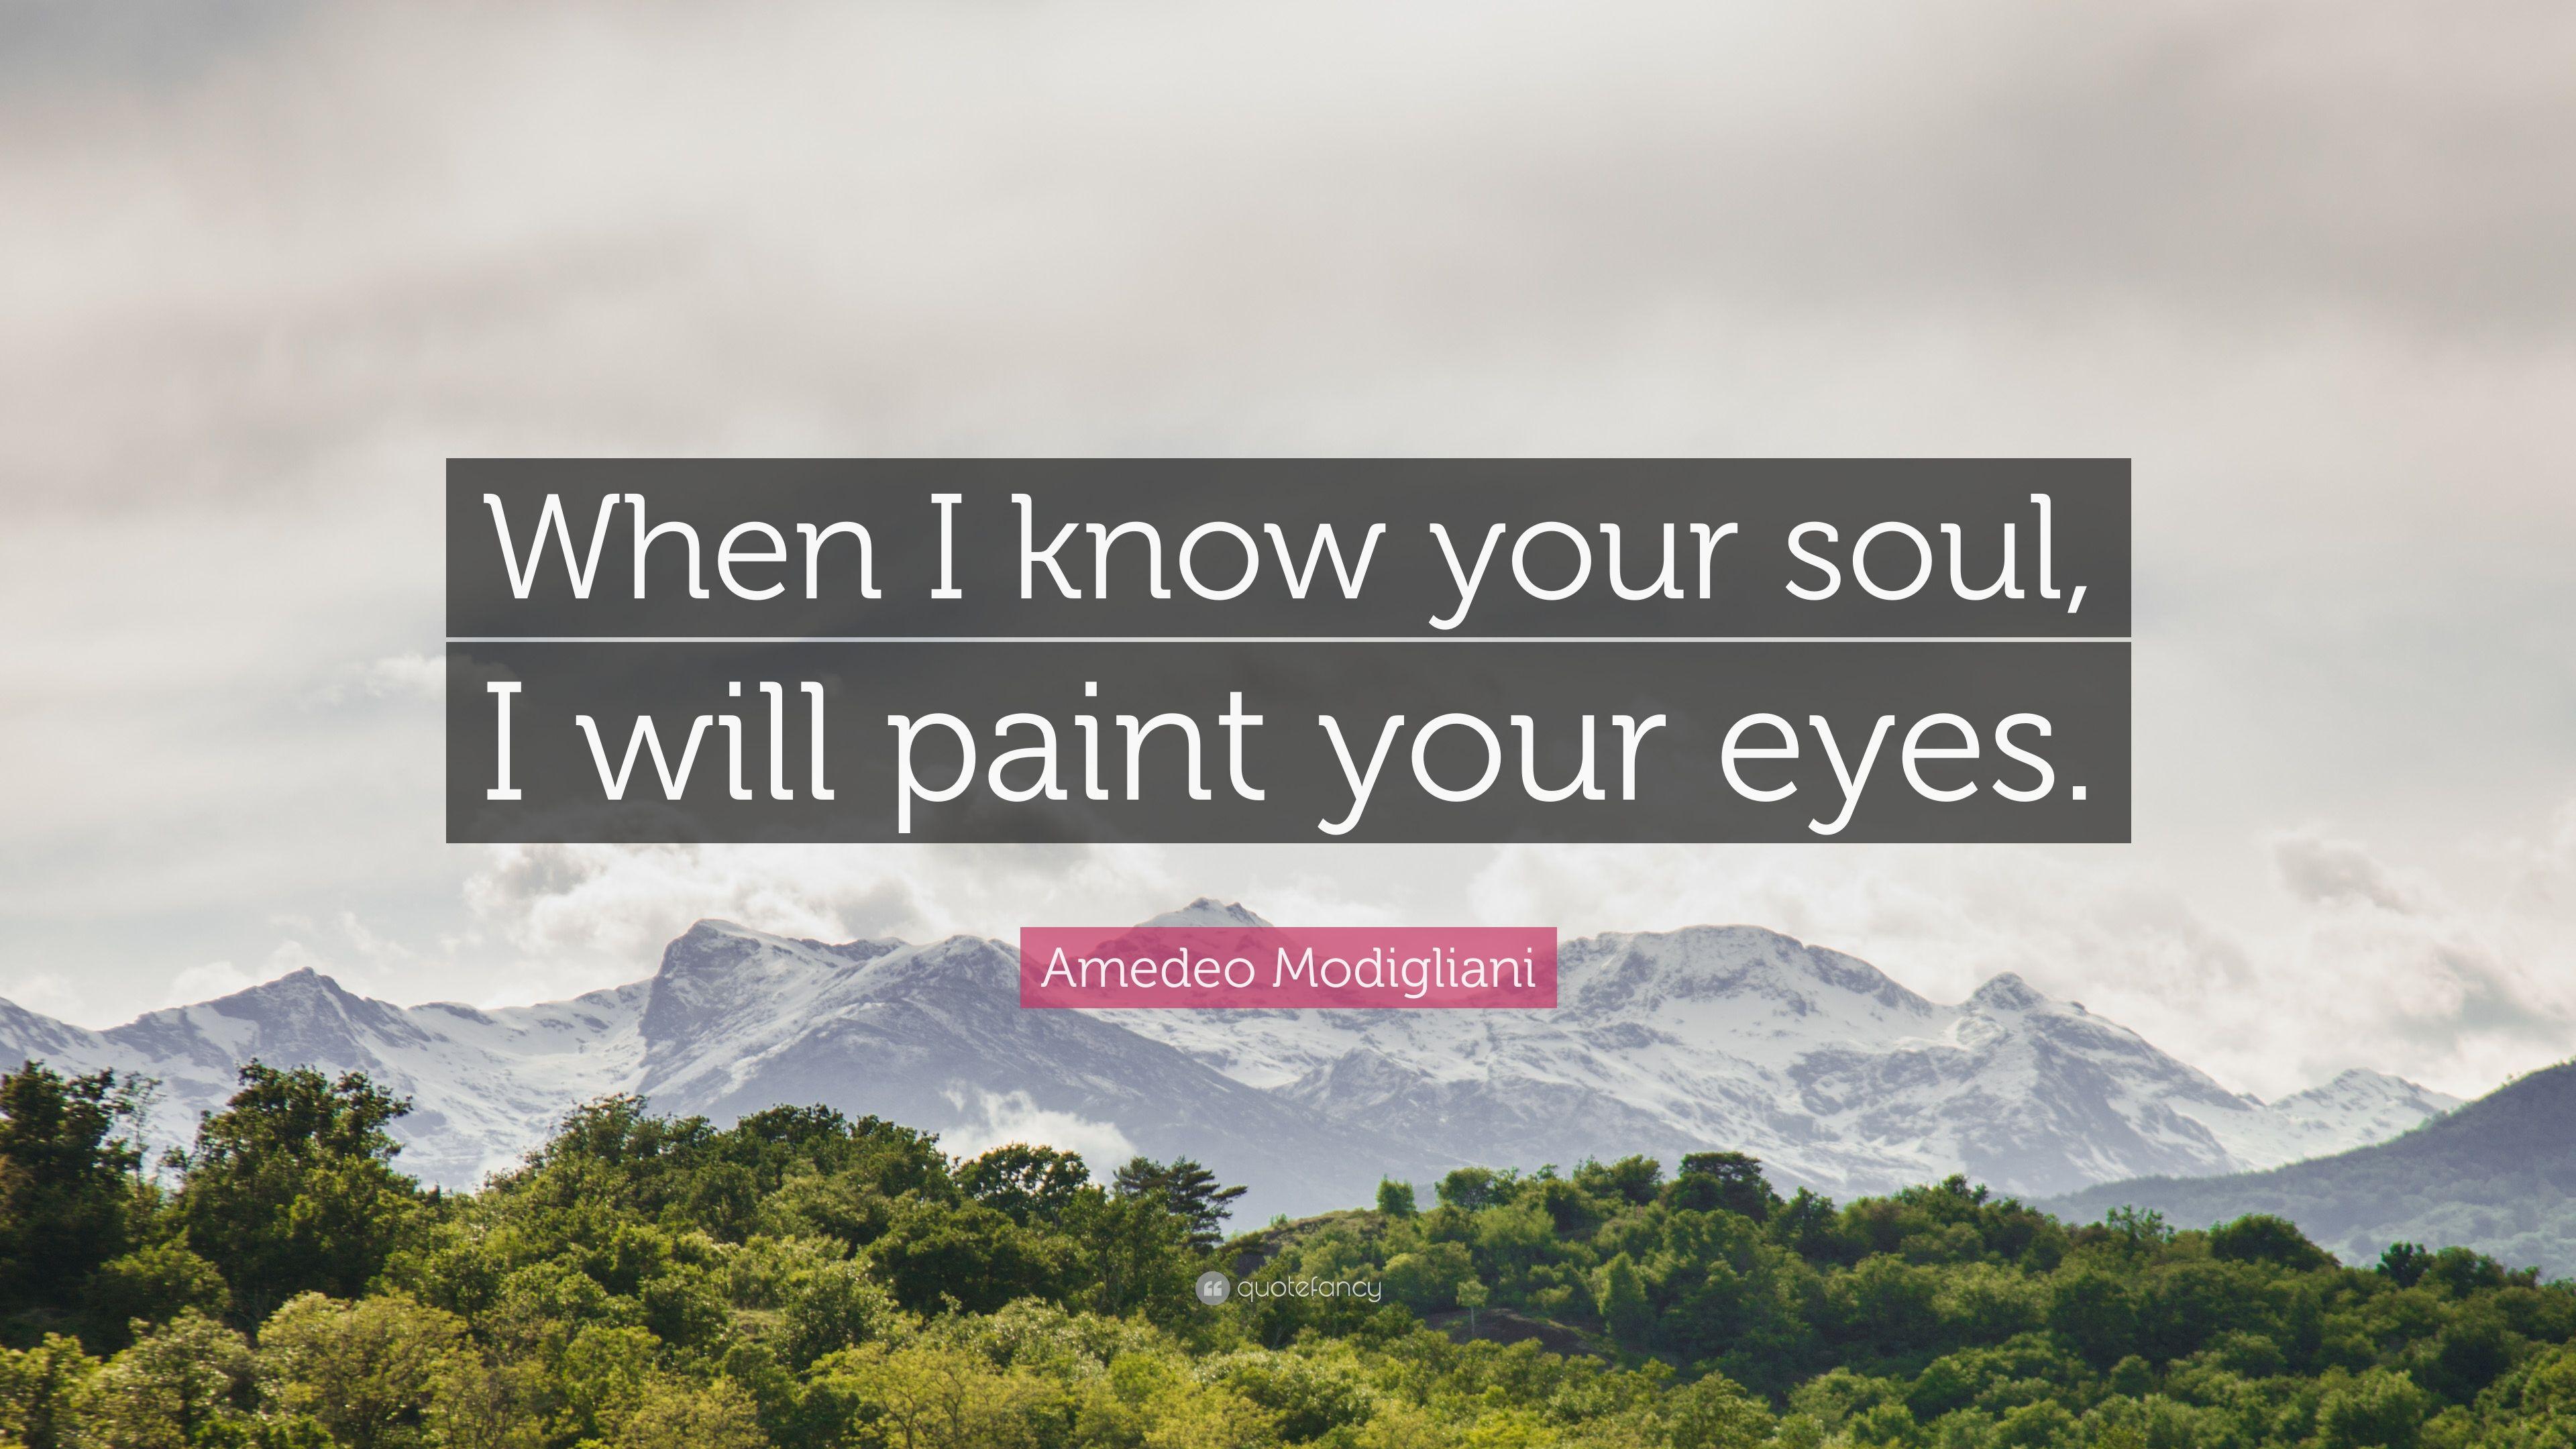 Amedeo Modigliani Quote: “When I know your soul, I will paint your